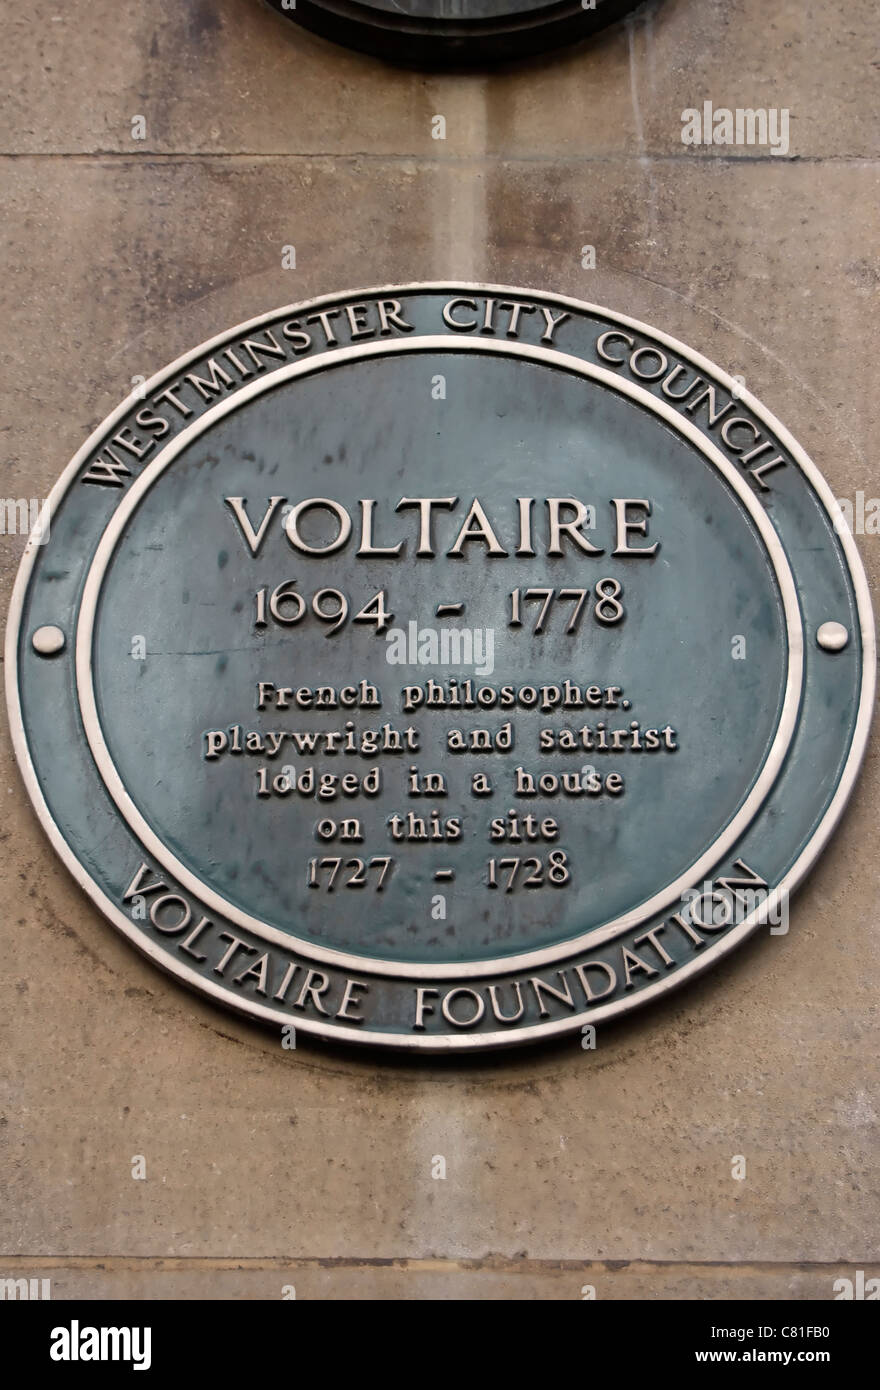 westminster council green plaque marking a lodging site of french philosopher and writer voltaire, maiden lane, london, england Stock Photo